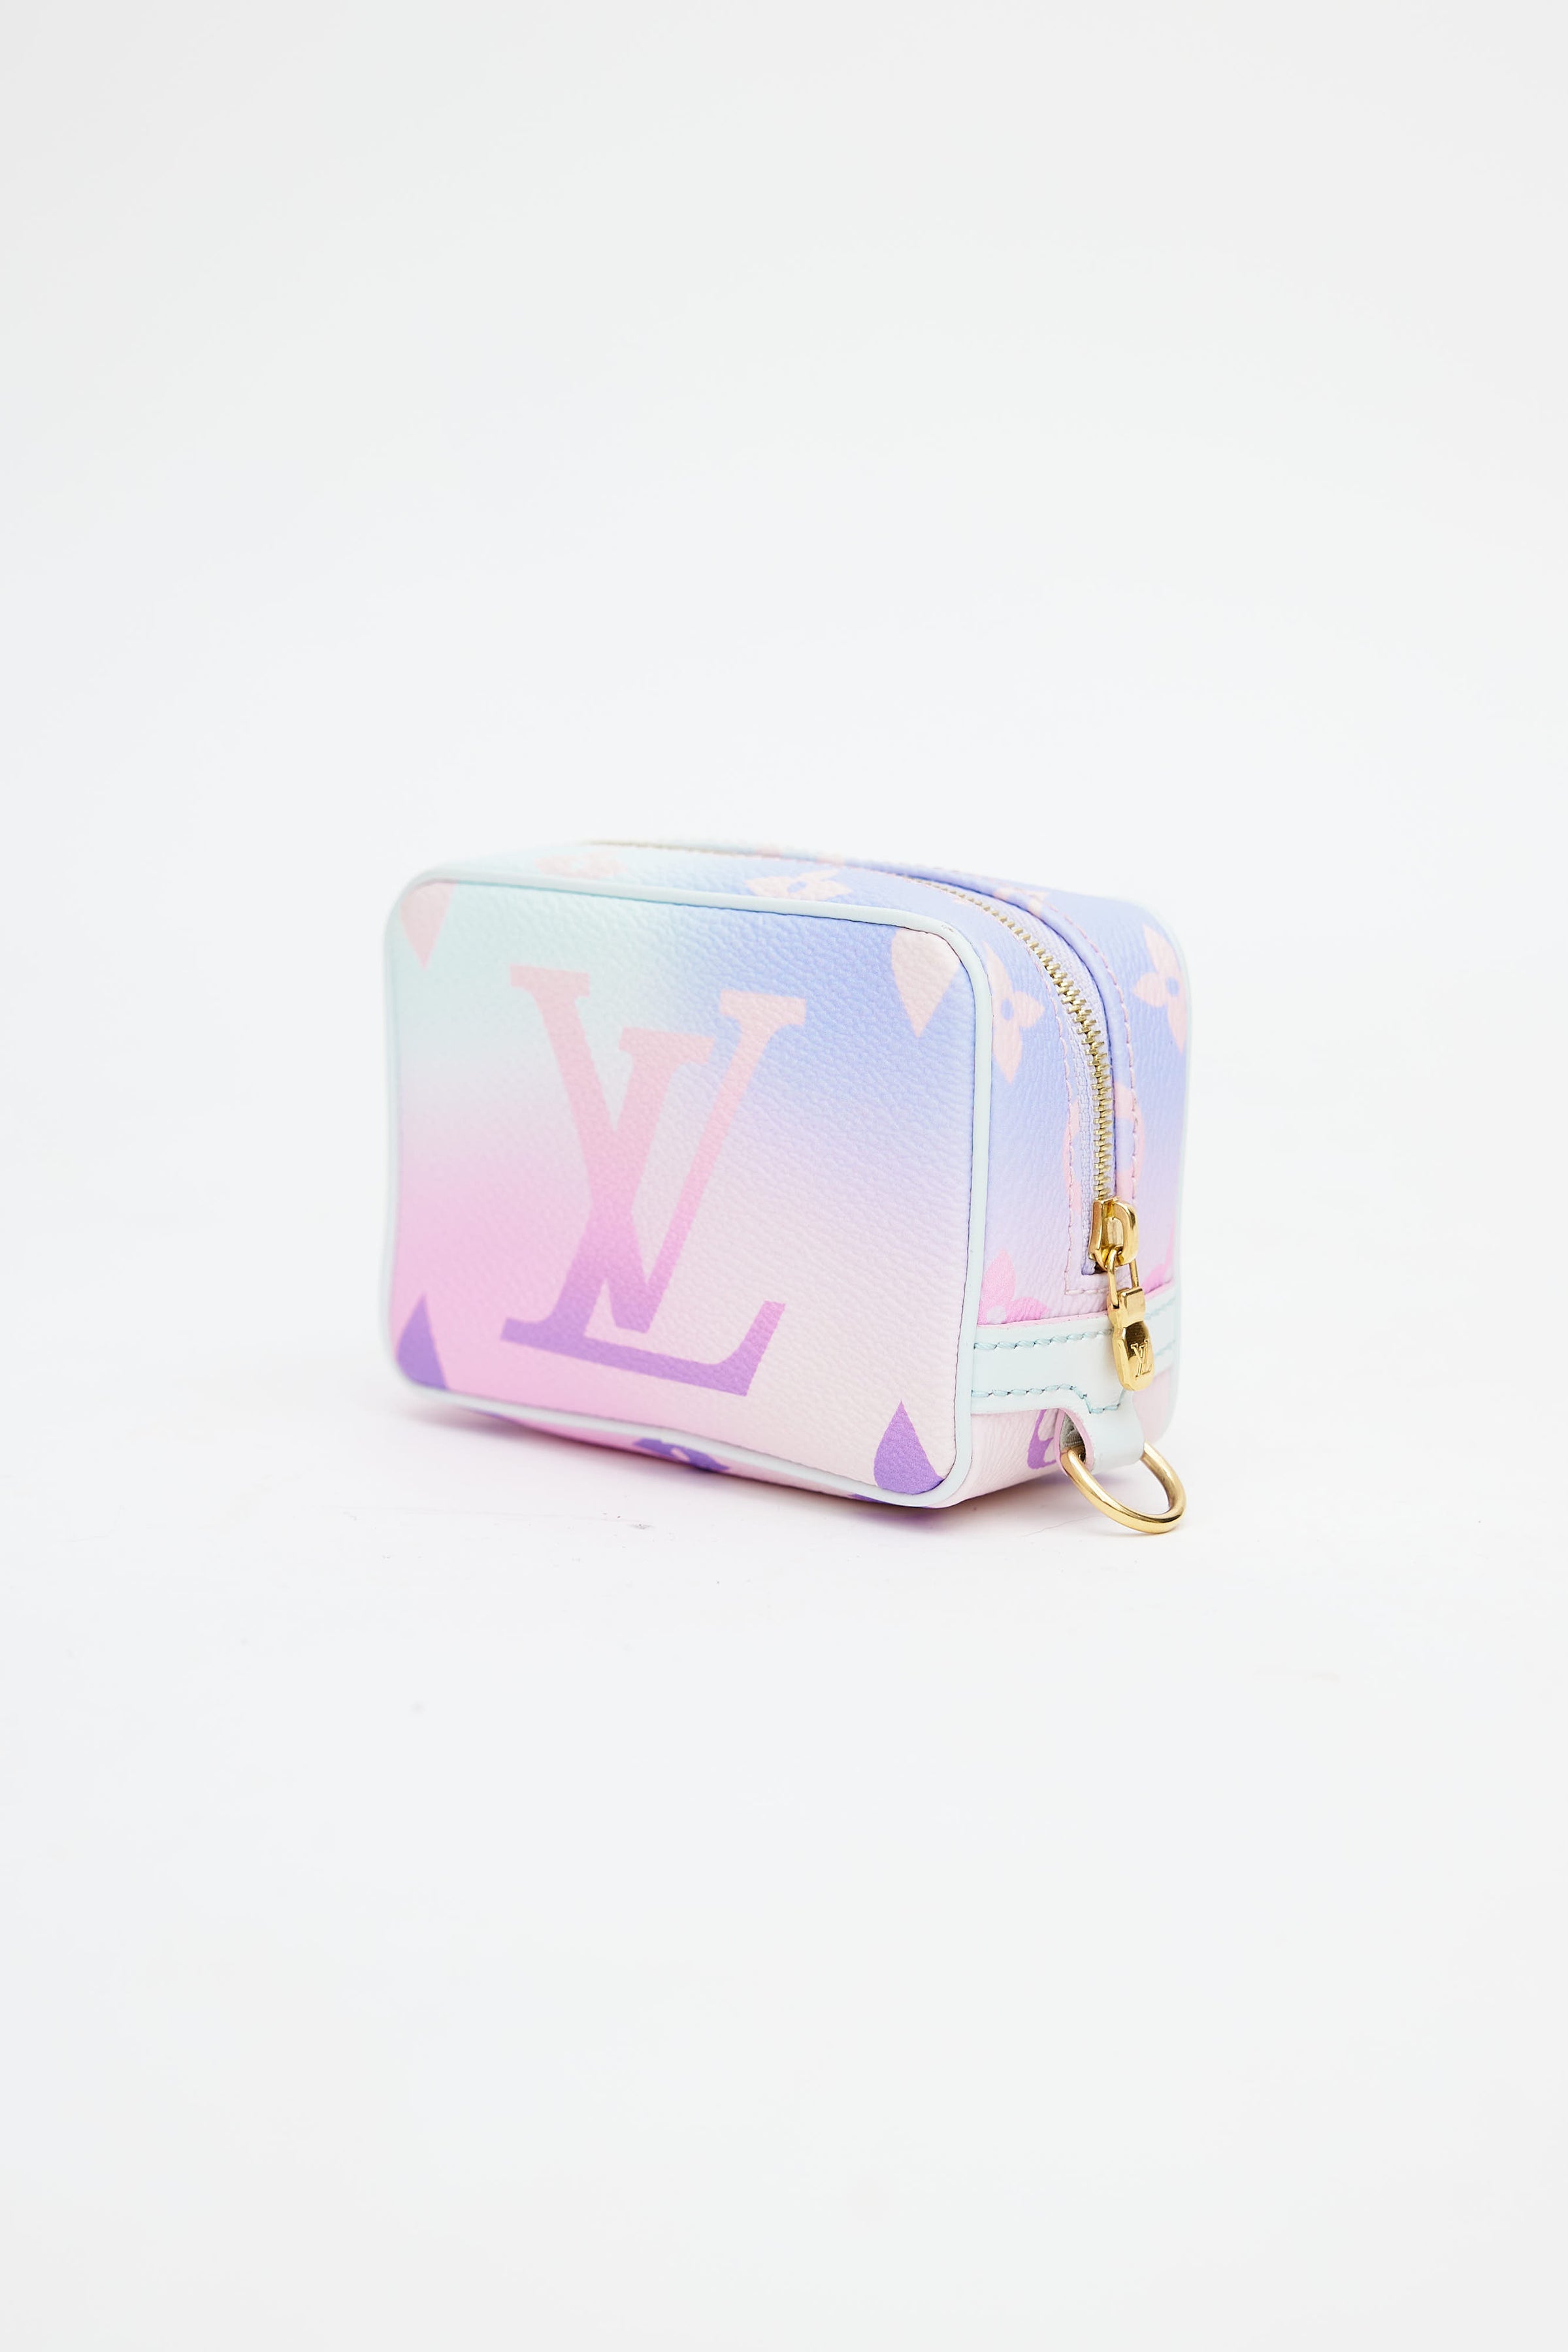 Louis Vuitton on X: Early morning sunrise. A pastel Monogram